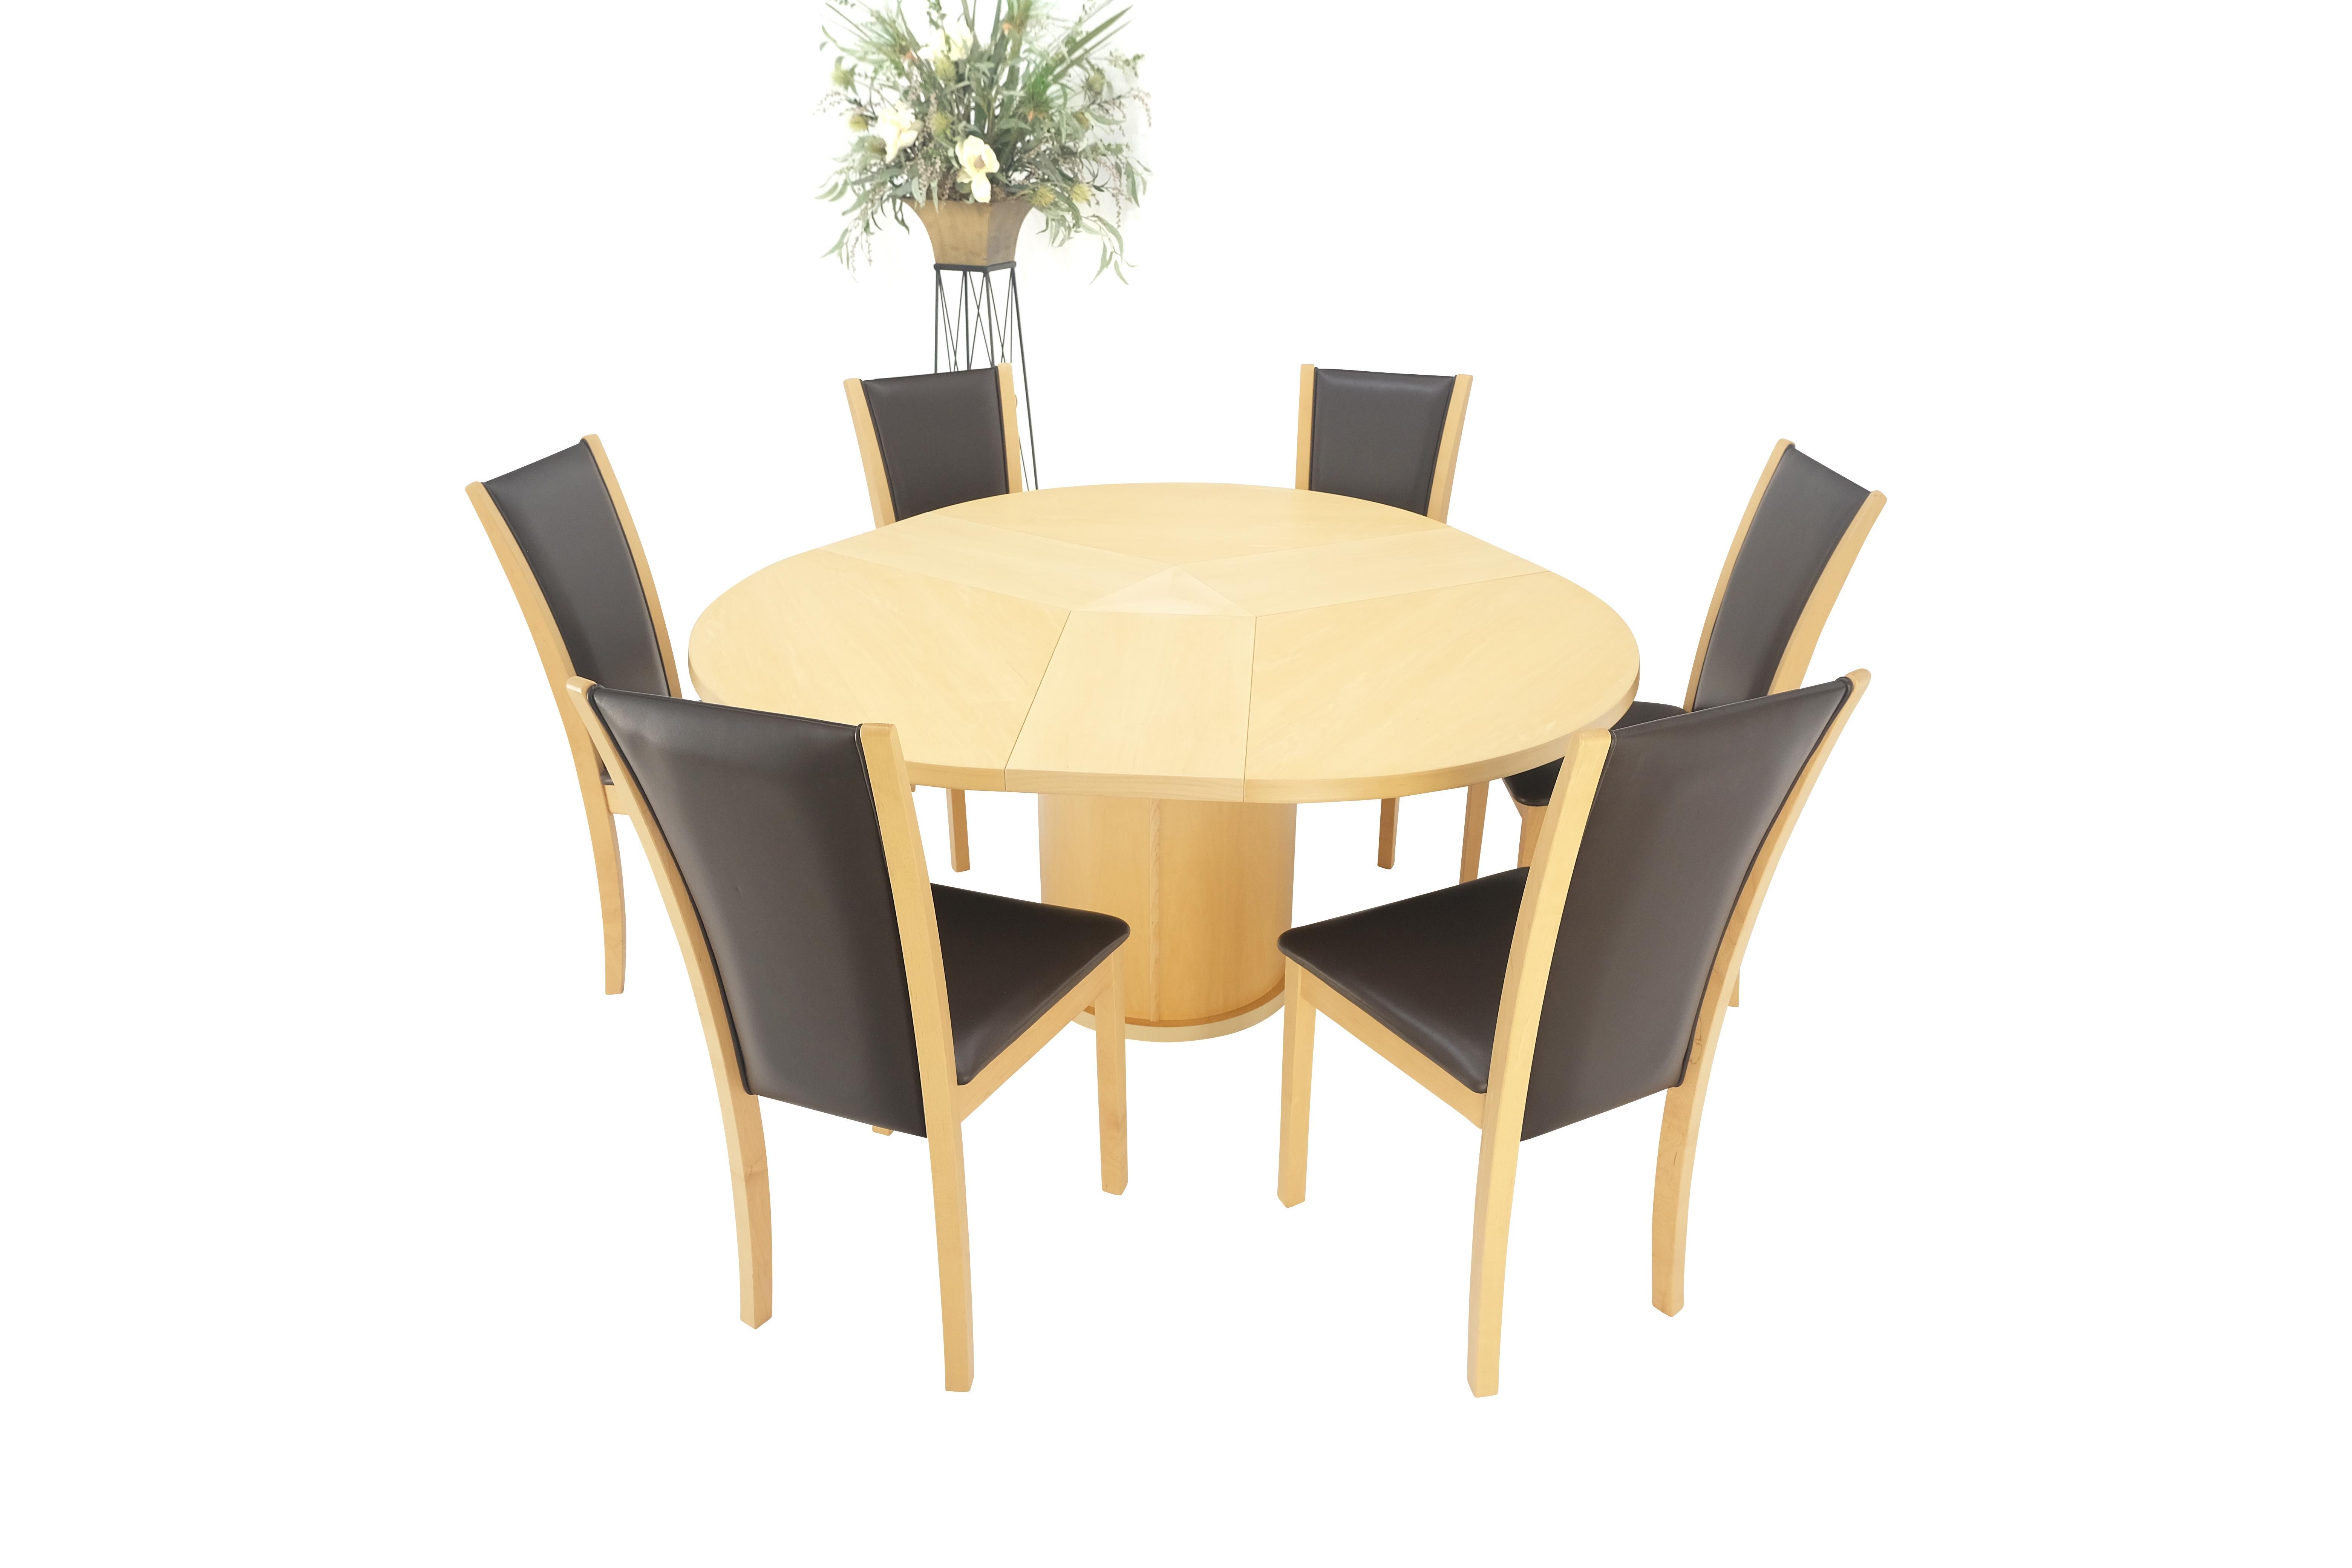 Rare Blond Maple Round Expandable Dining Table 6 Chairs Set Set Denmark MINT!  For Sale 3